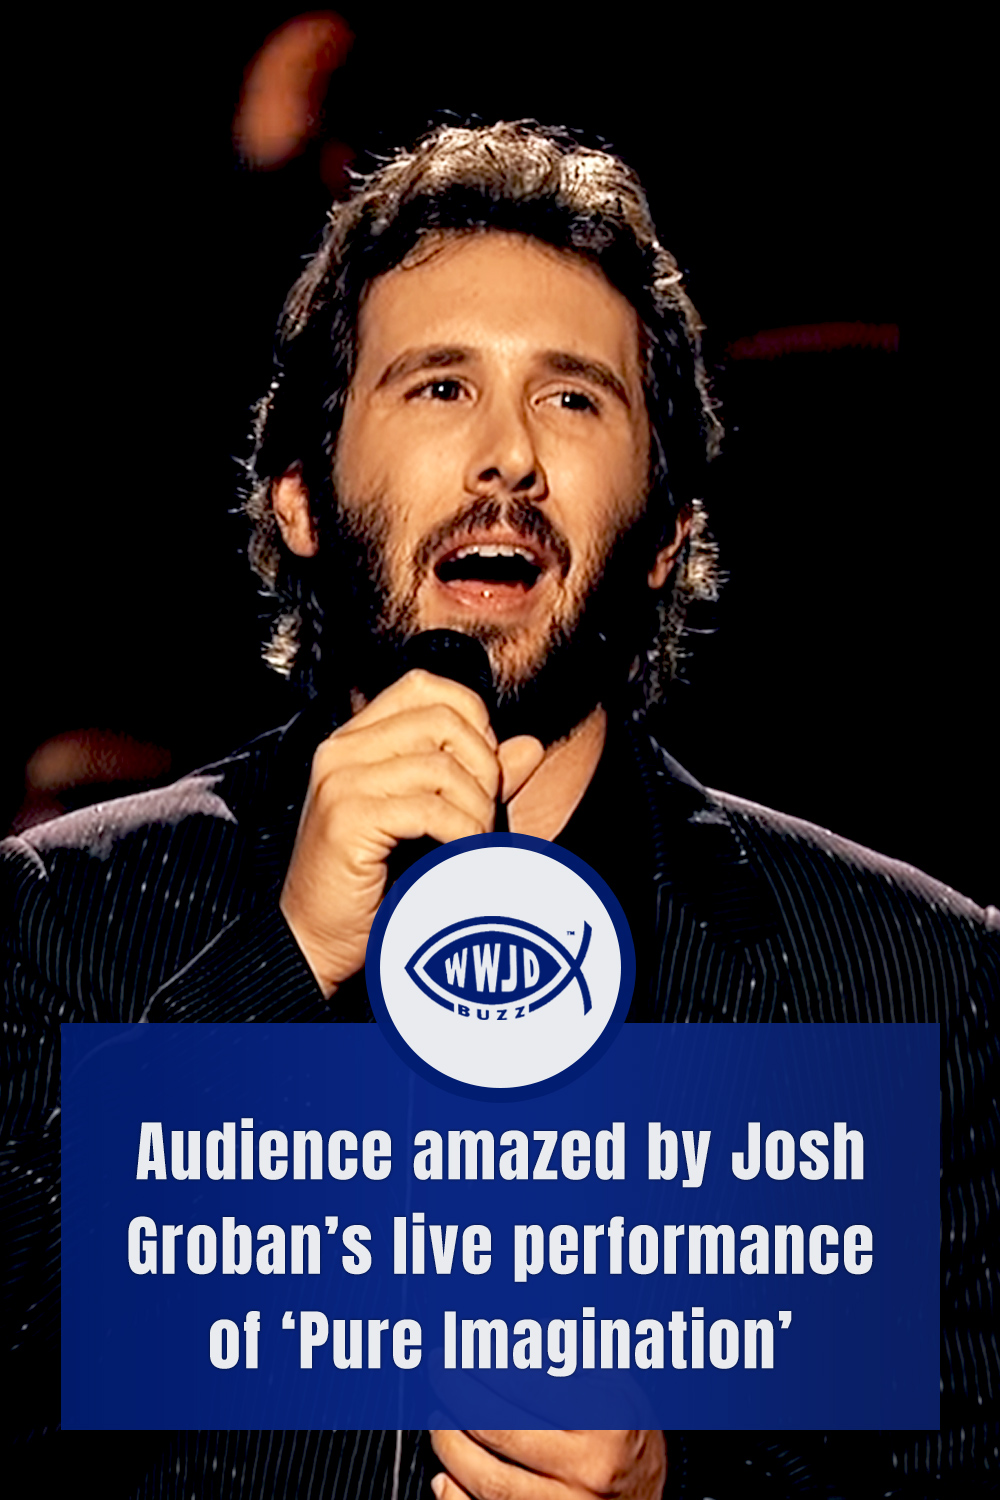 Audience amazed by Josh Groban’s live performance of ‘Pure Imagination’